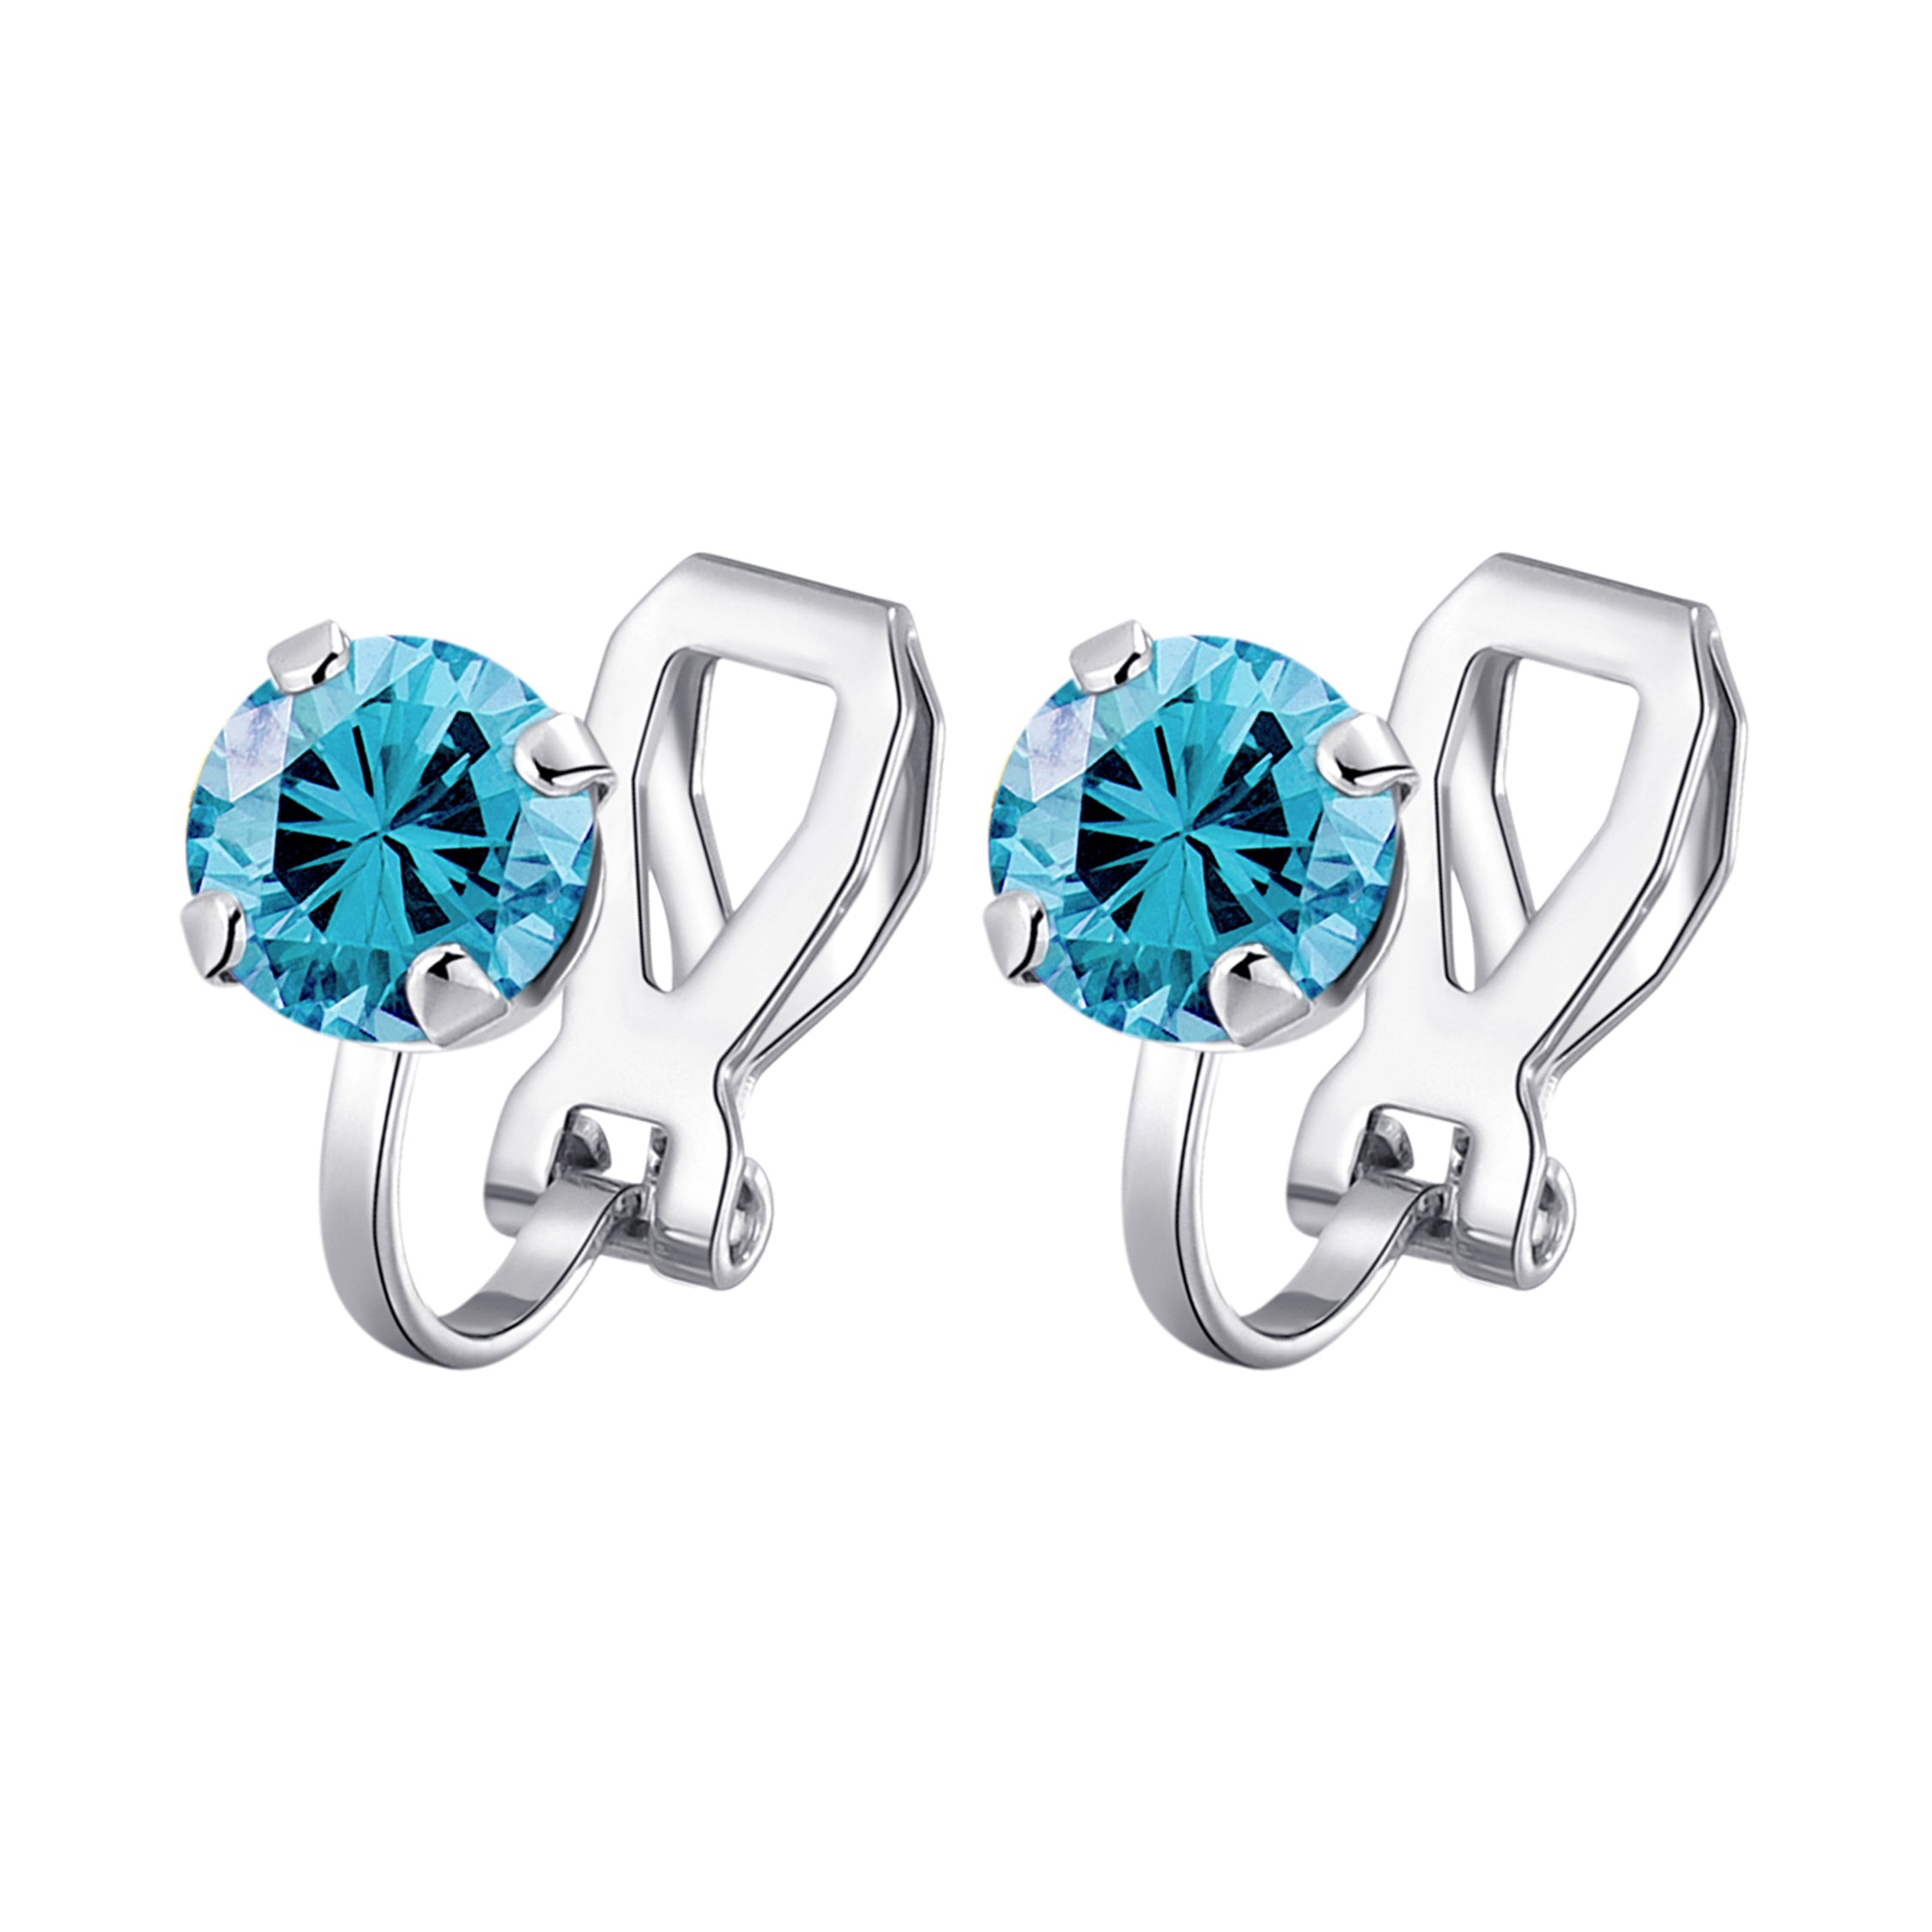 Light Blue Crystal Clip On Earrings Created with Zircondia® Crystals by Philip Jones Jewellery